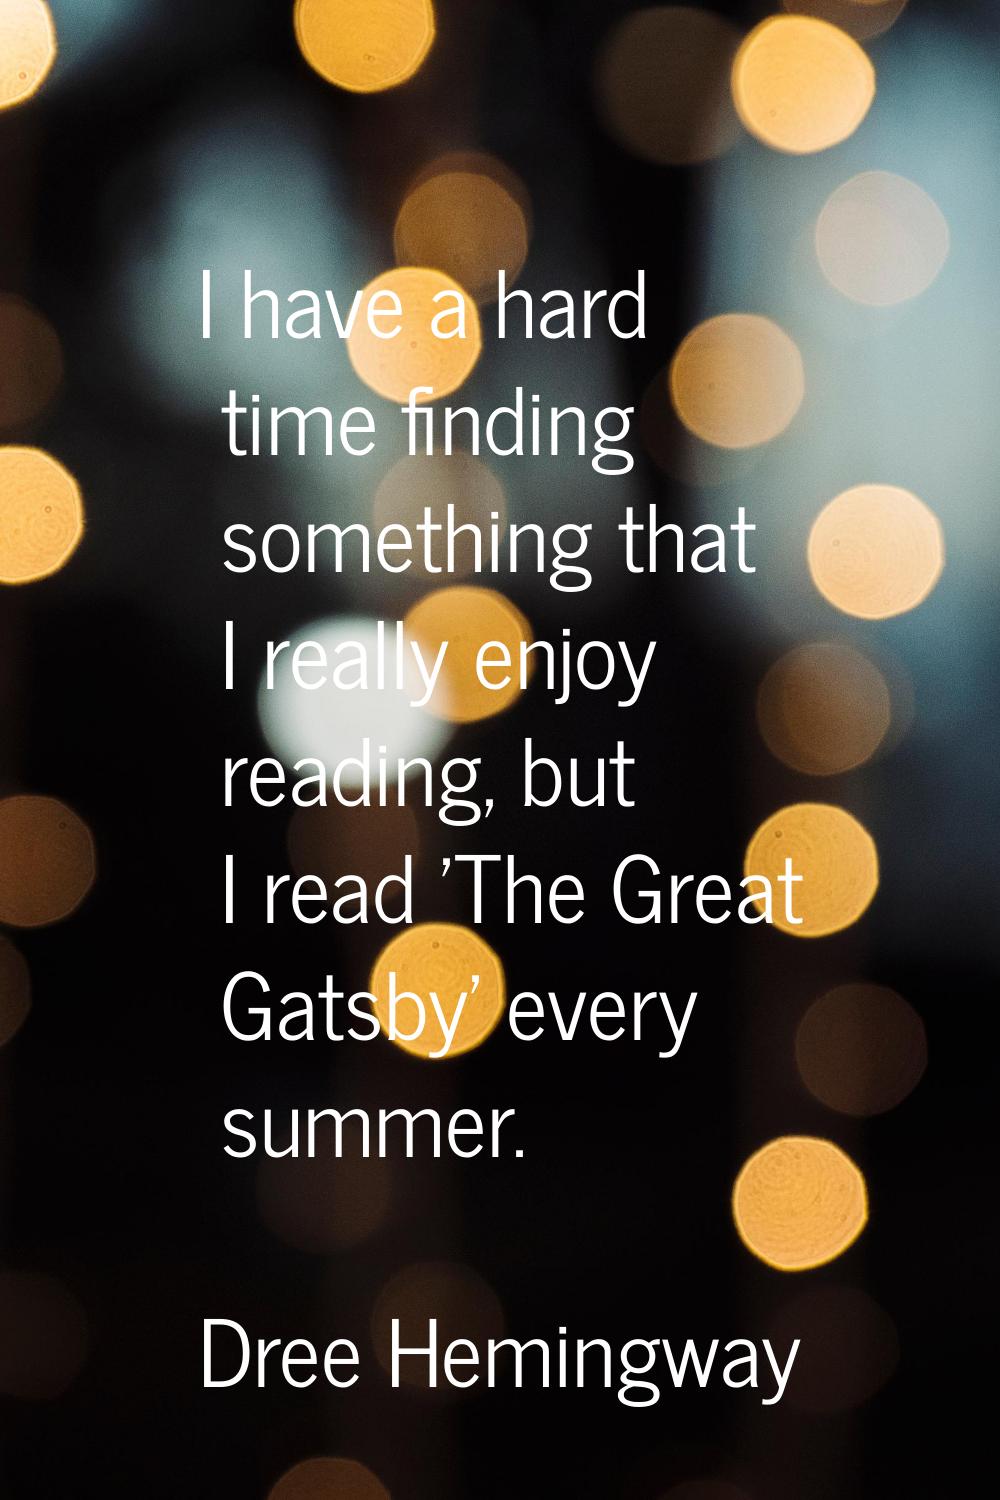 I have a hard time finding something that I really enjoy reading, but I read 'The Great Gatsby' eve